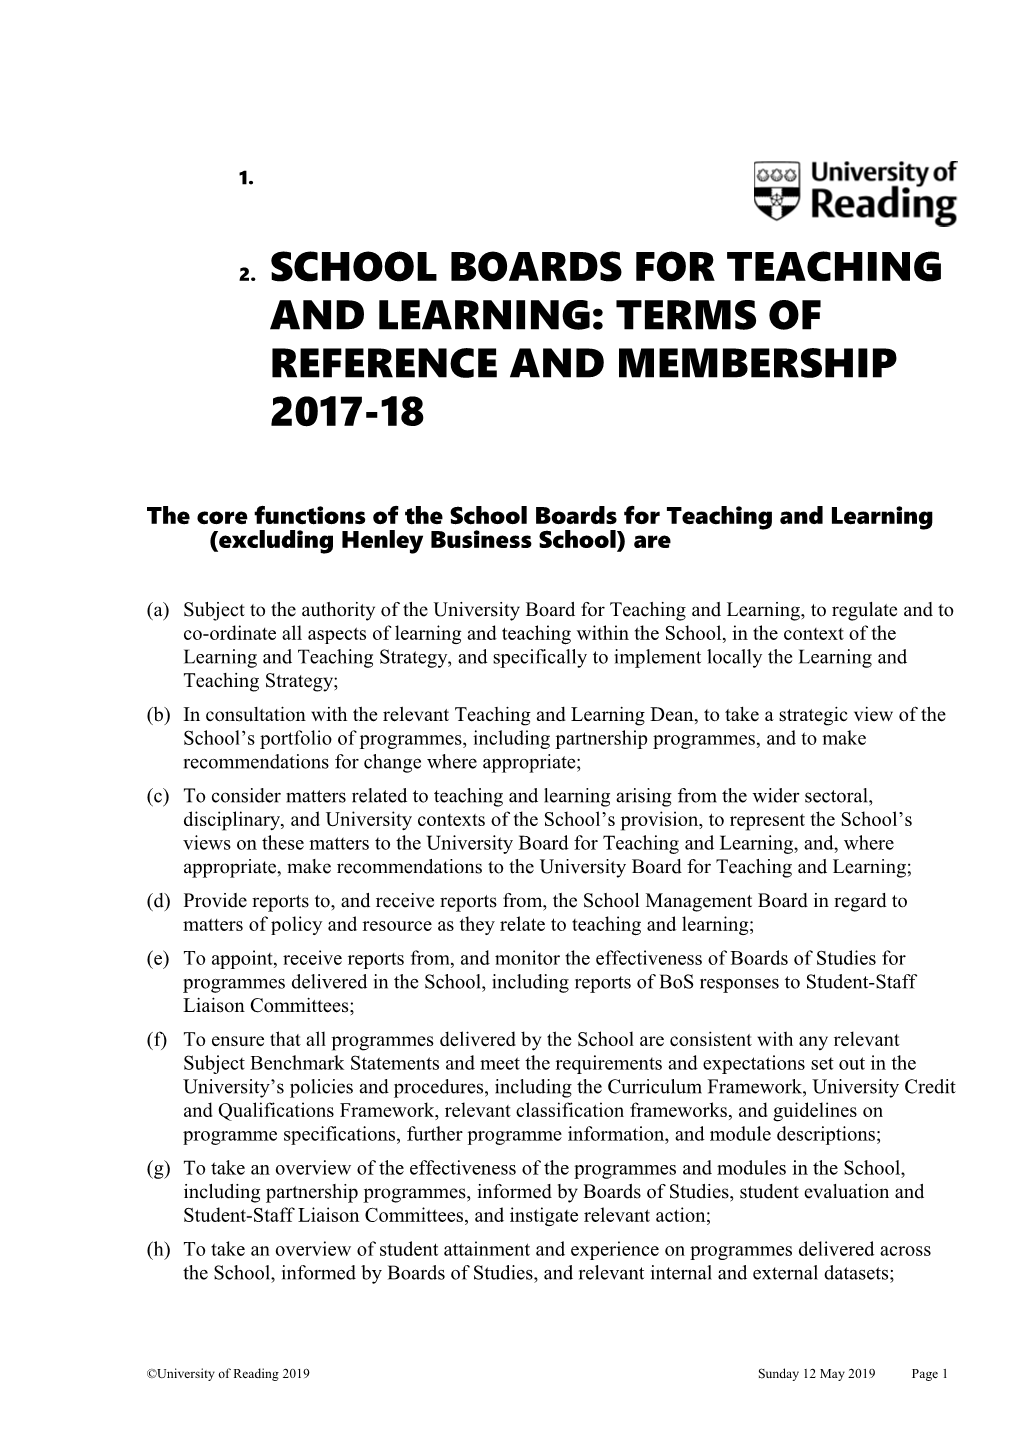 School Boards for Teaching and Learning: Terms of Reference and Membership 2017-18